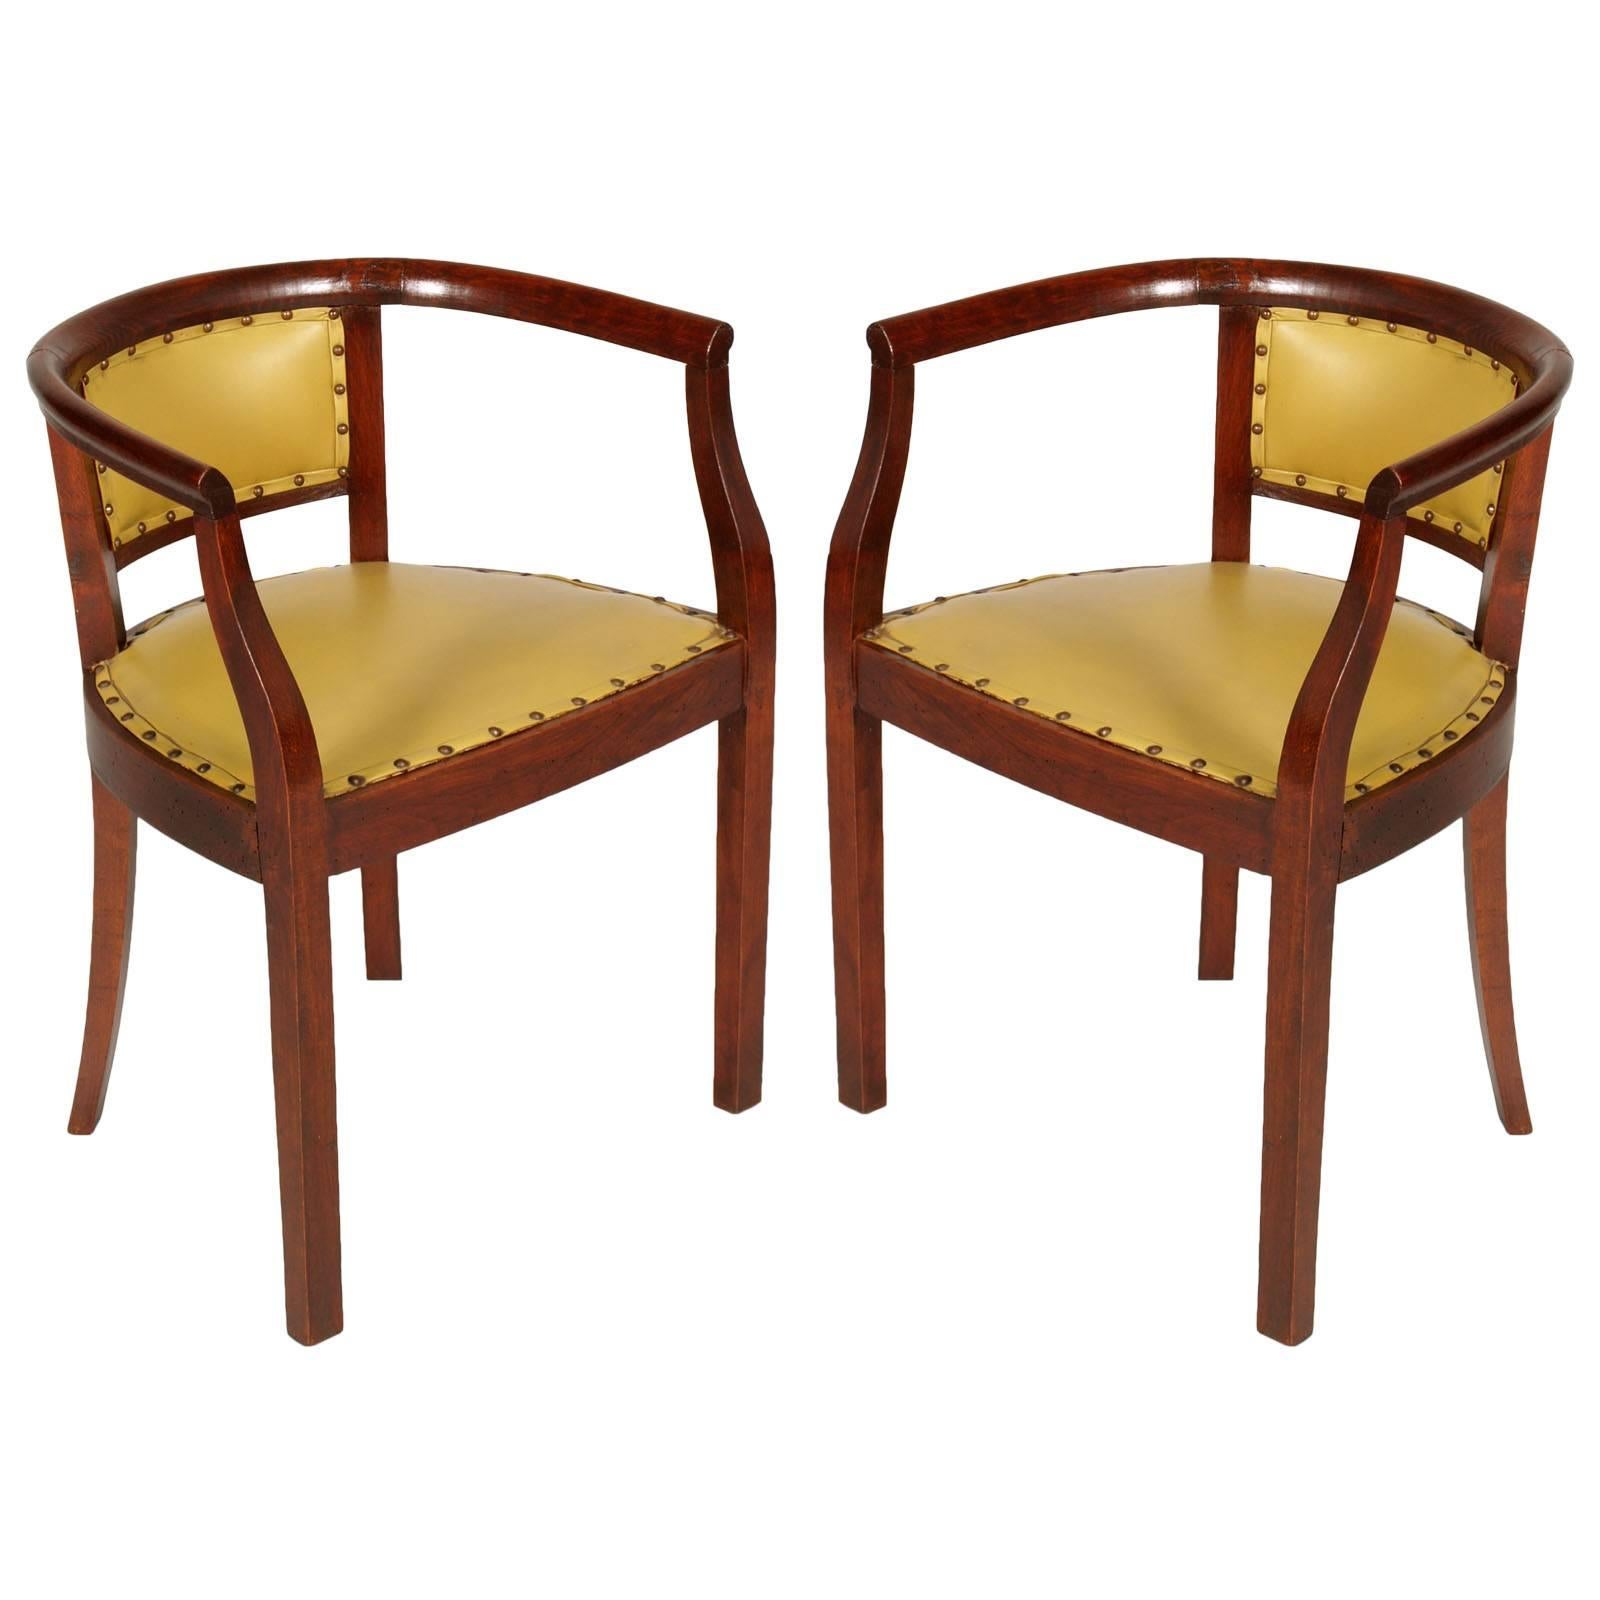 1930s Pair of "Pozzetto" Chairs Art Deco in Walnut Coating Original Leatherete